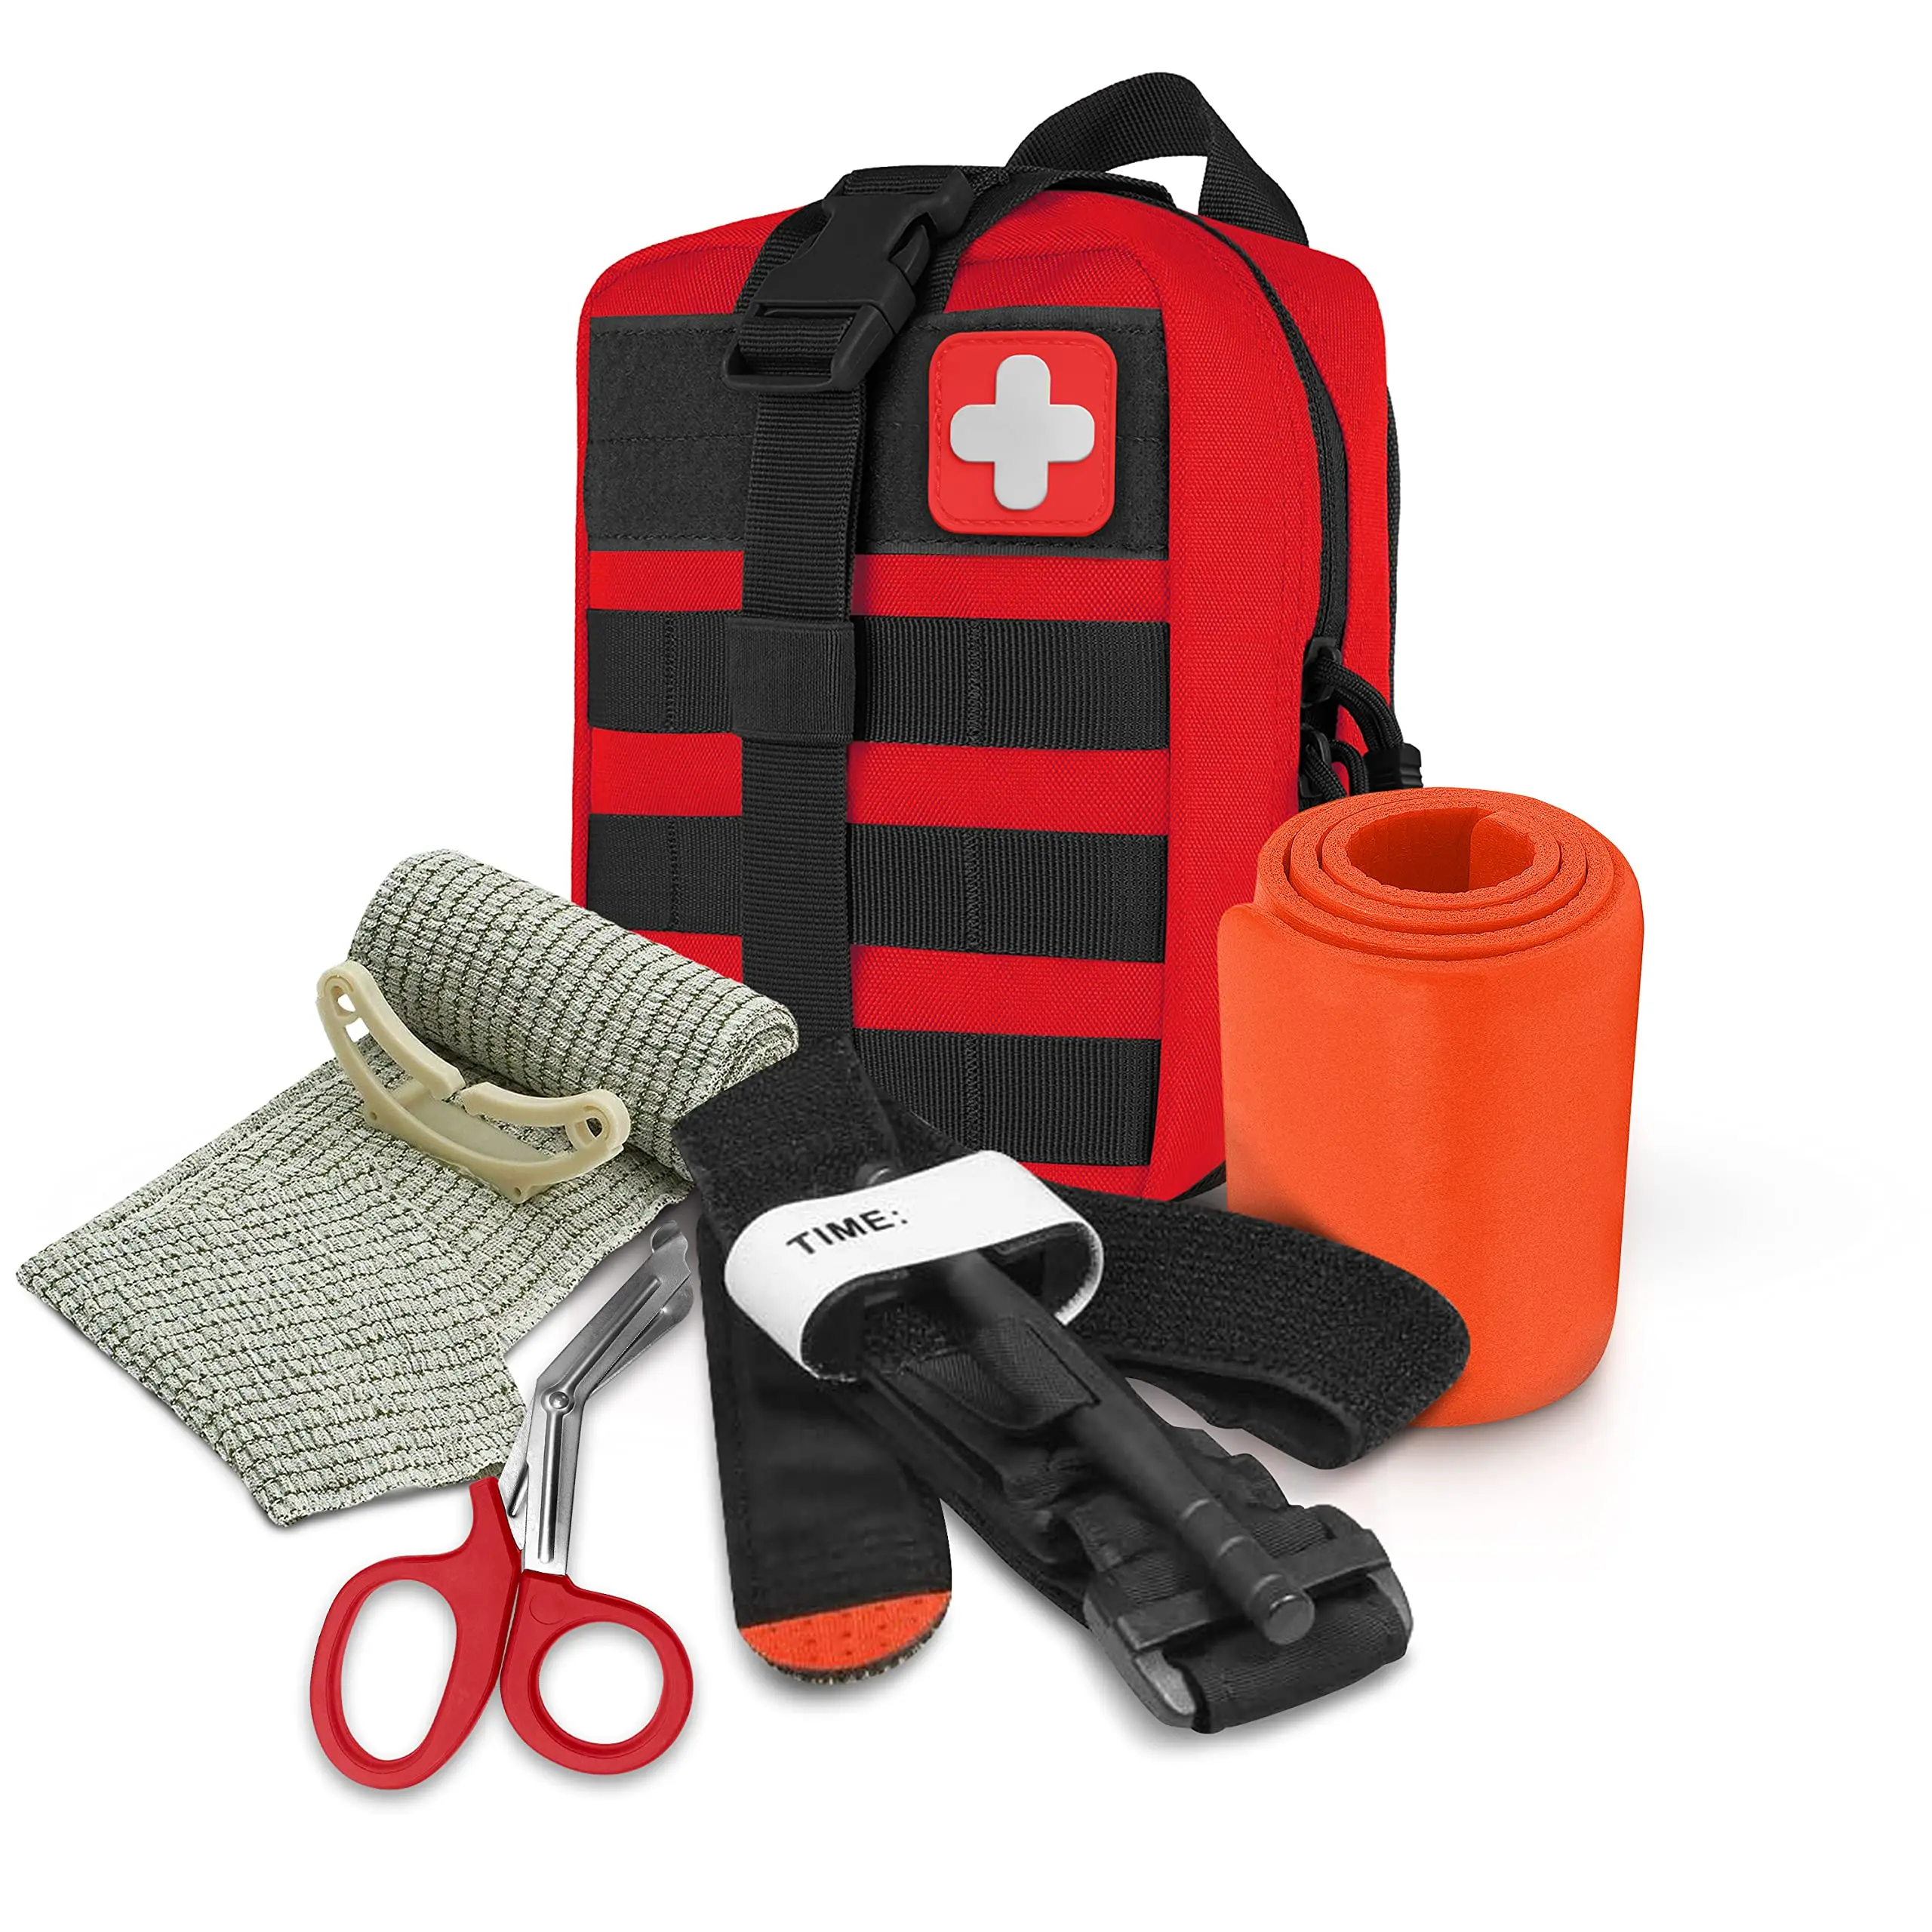 

Rescue Tactical Trauma Kit Emergency First Aid Stop The Bleed IFAK Refill Supplies Combat Survival Gear Medical Kit